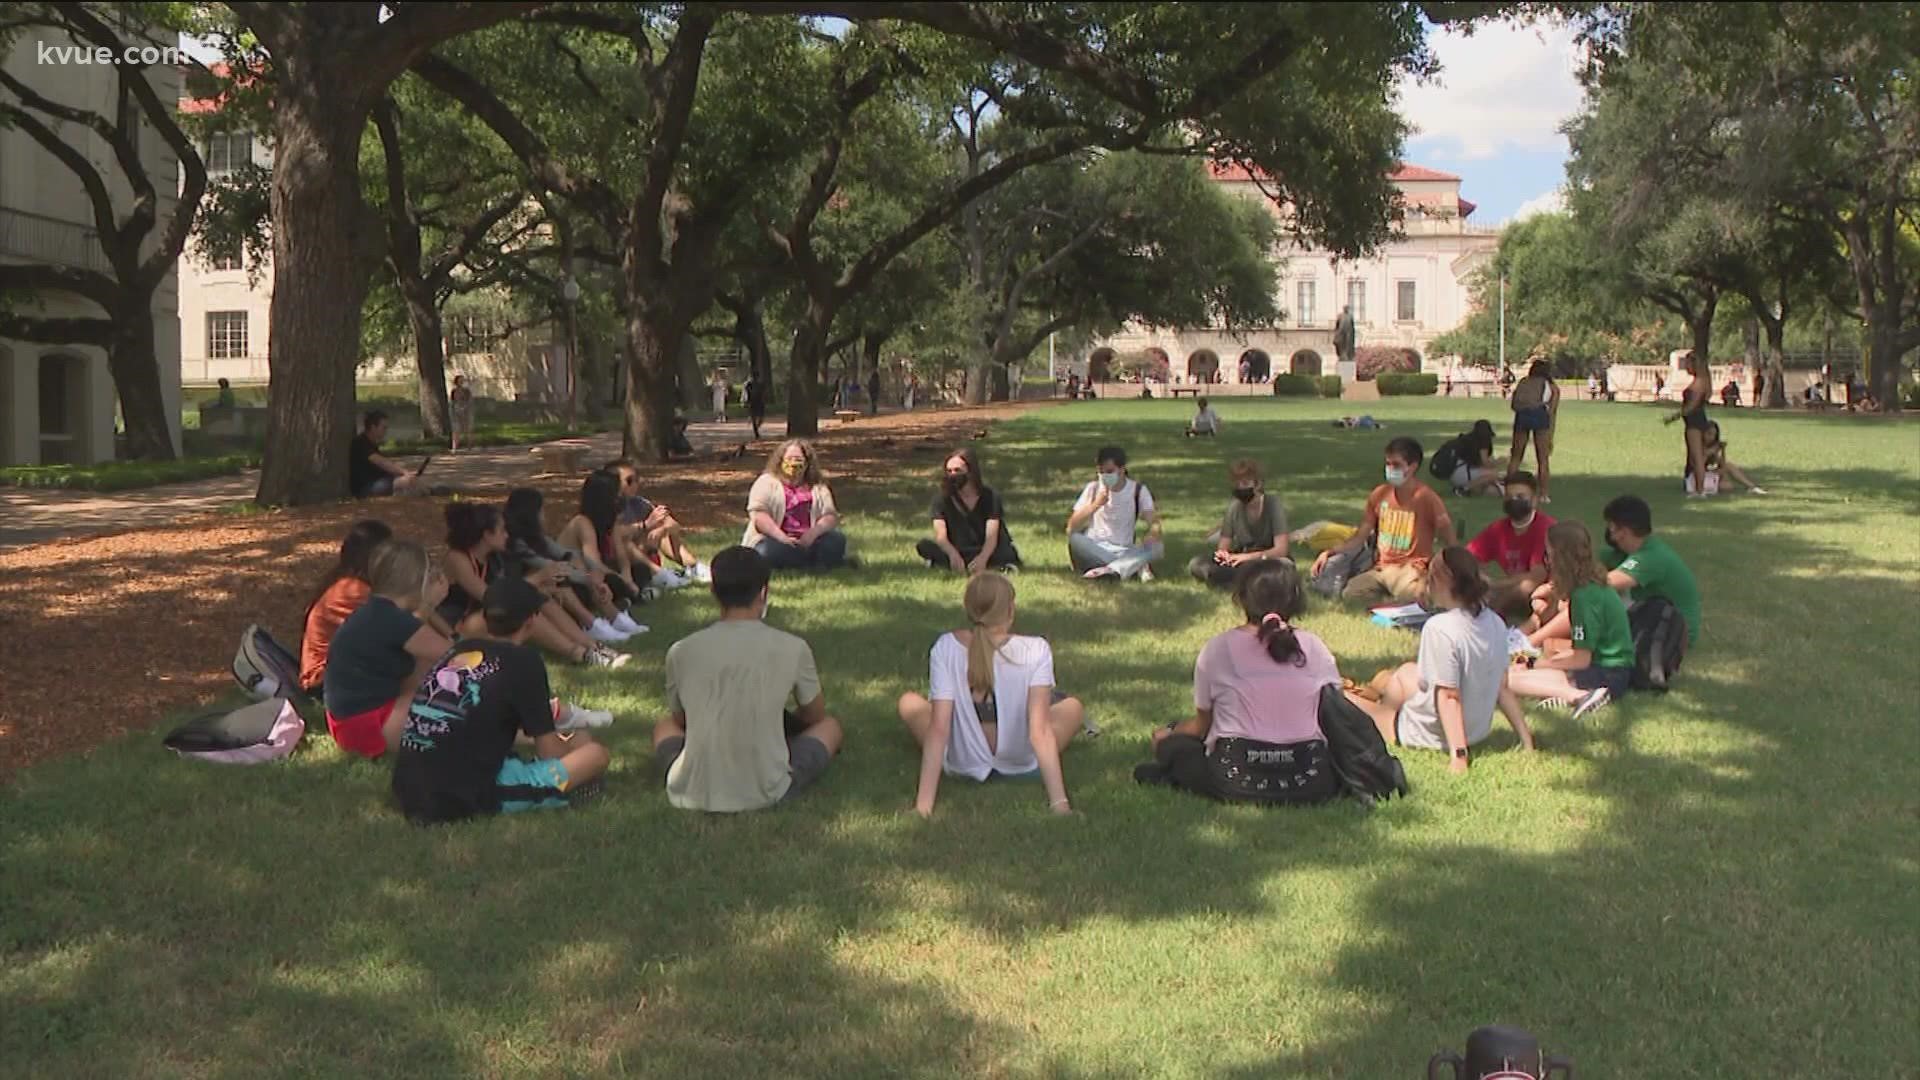 UT Austin's first day of classes was Wednesday, Aug. 25. The consortium projects that over 100 students could become infected with the virus within the first week.